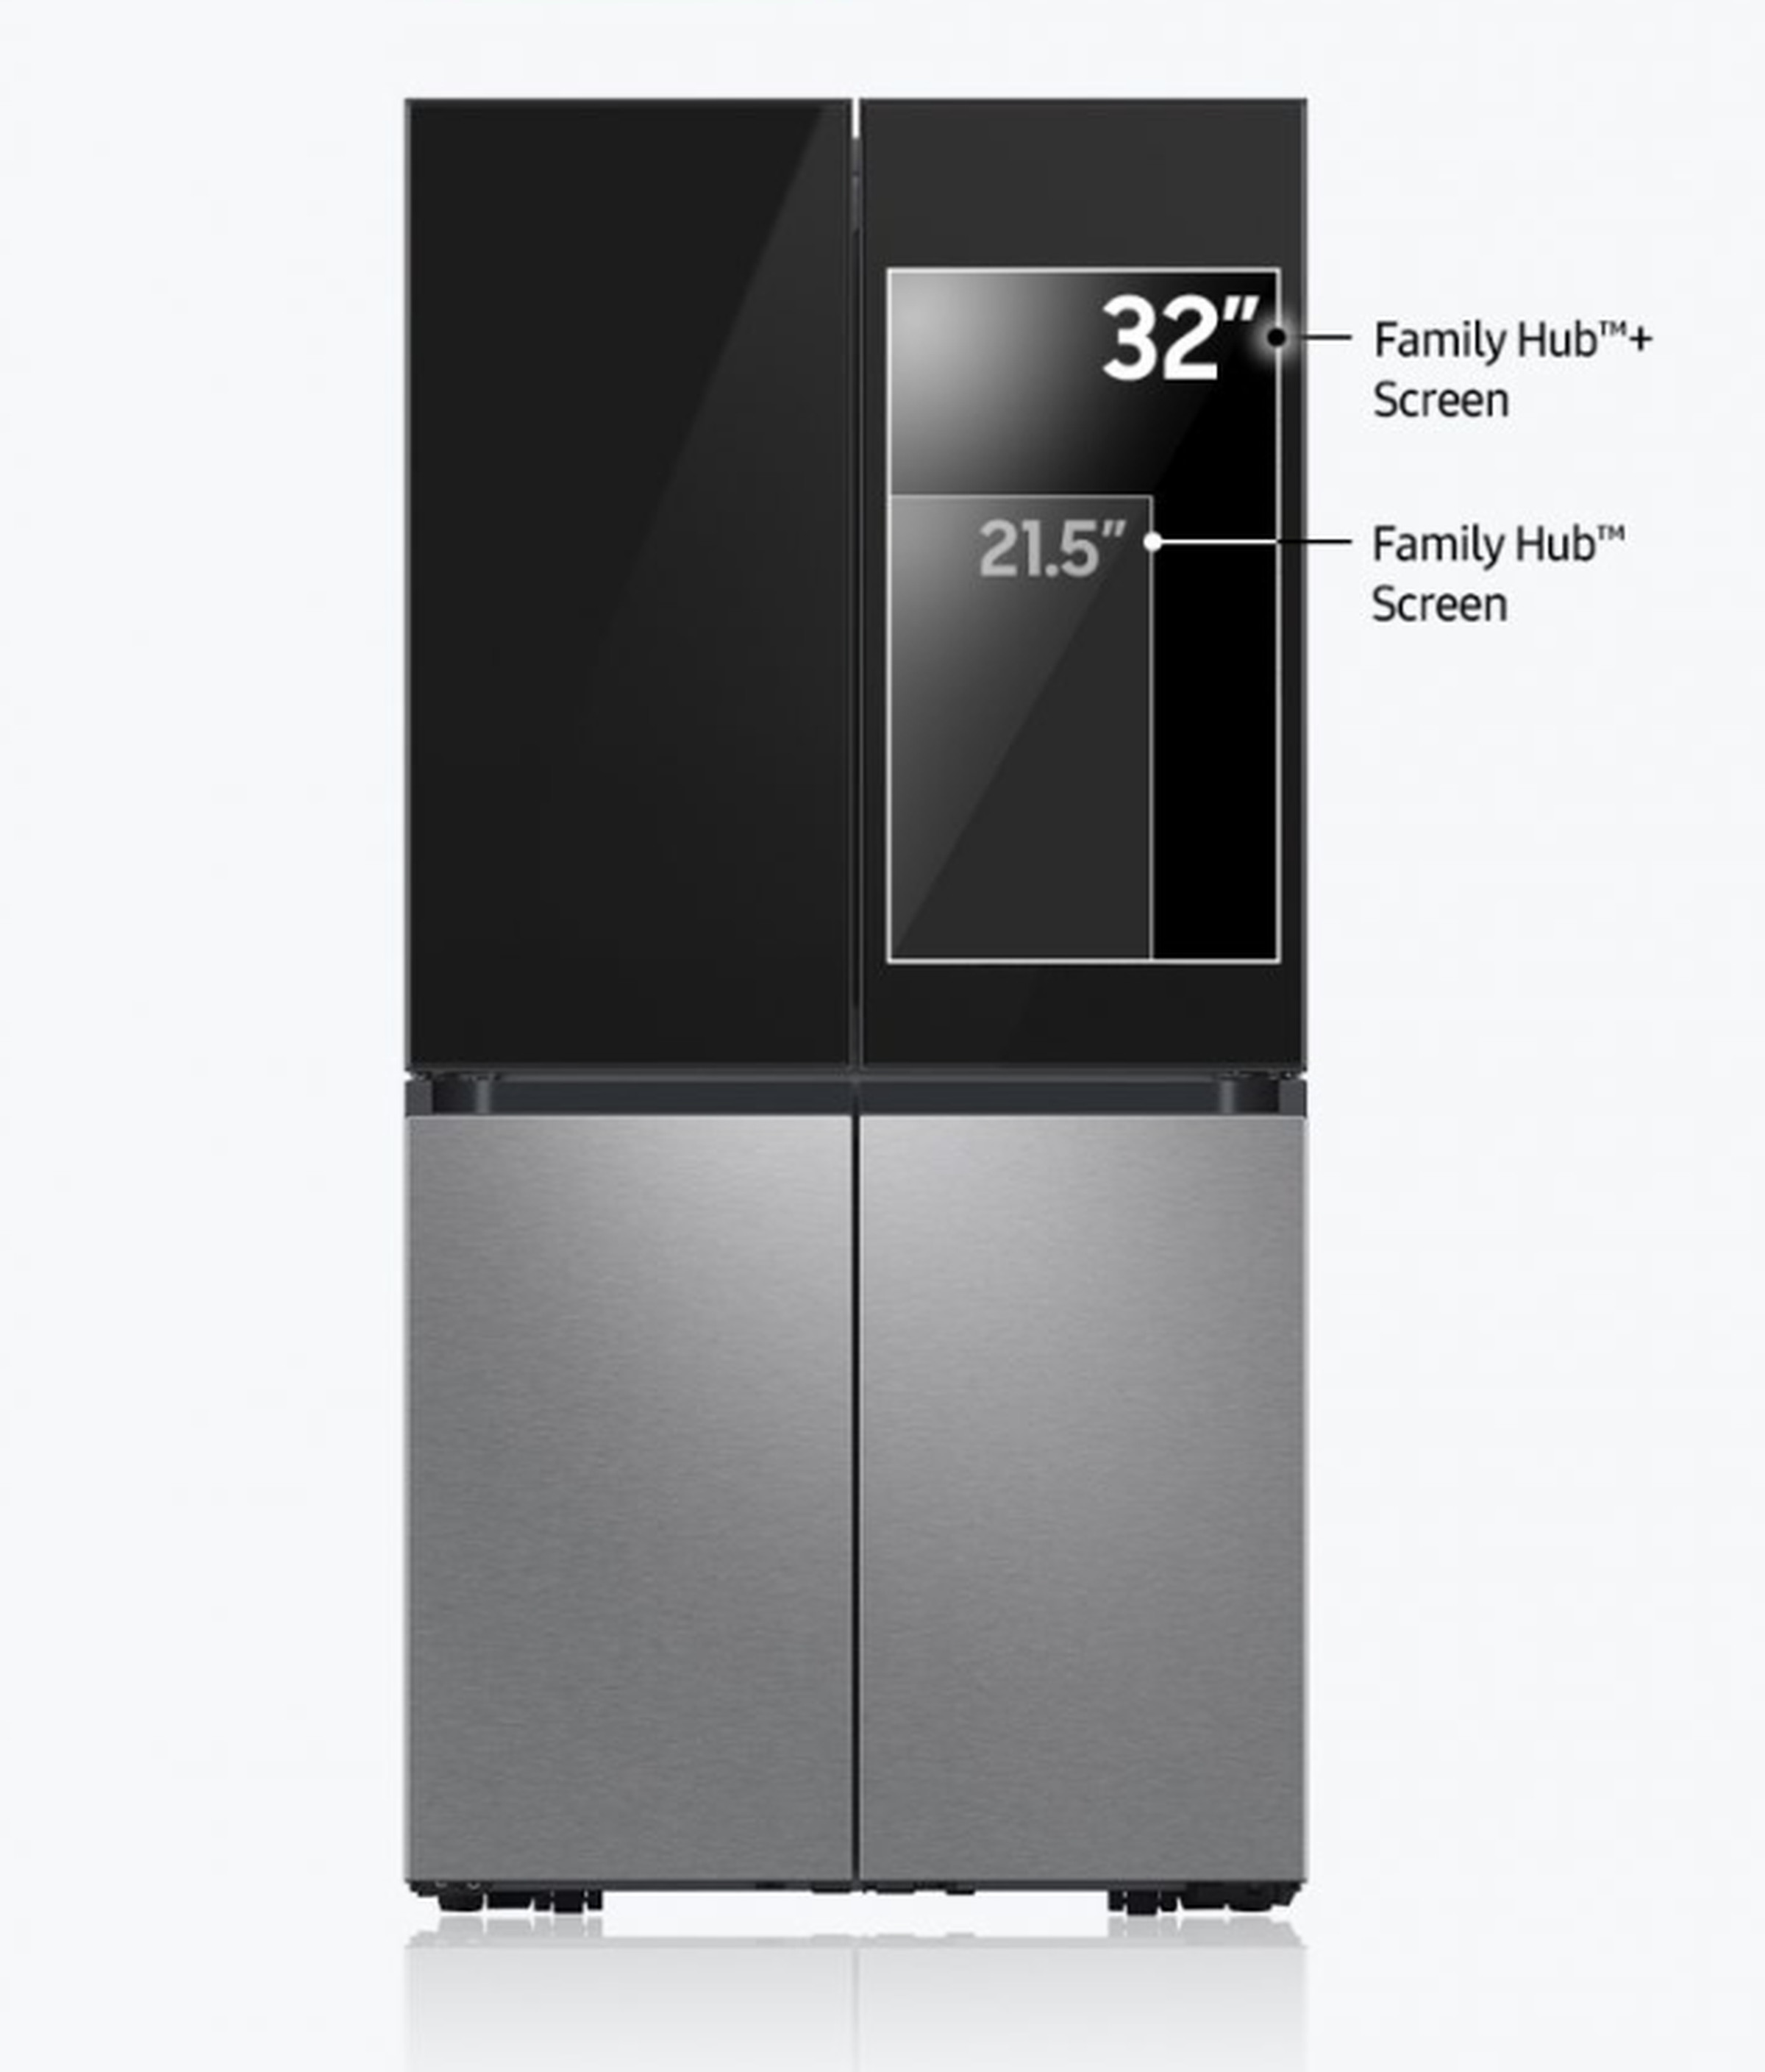 The Family Hub Plus has a screen twice as large as earlier models.